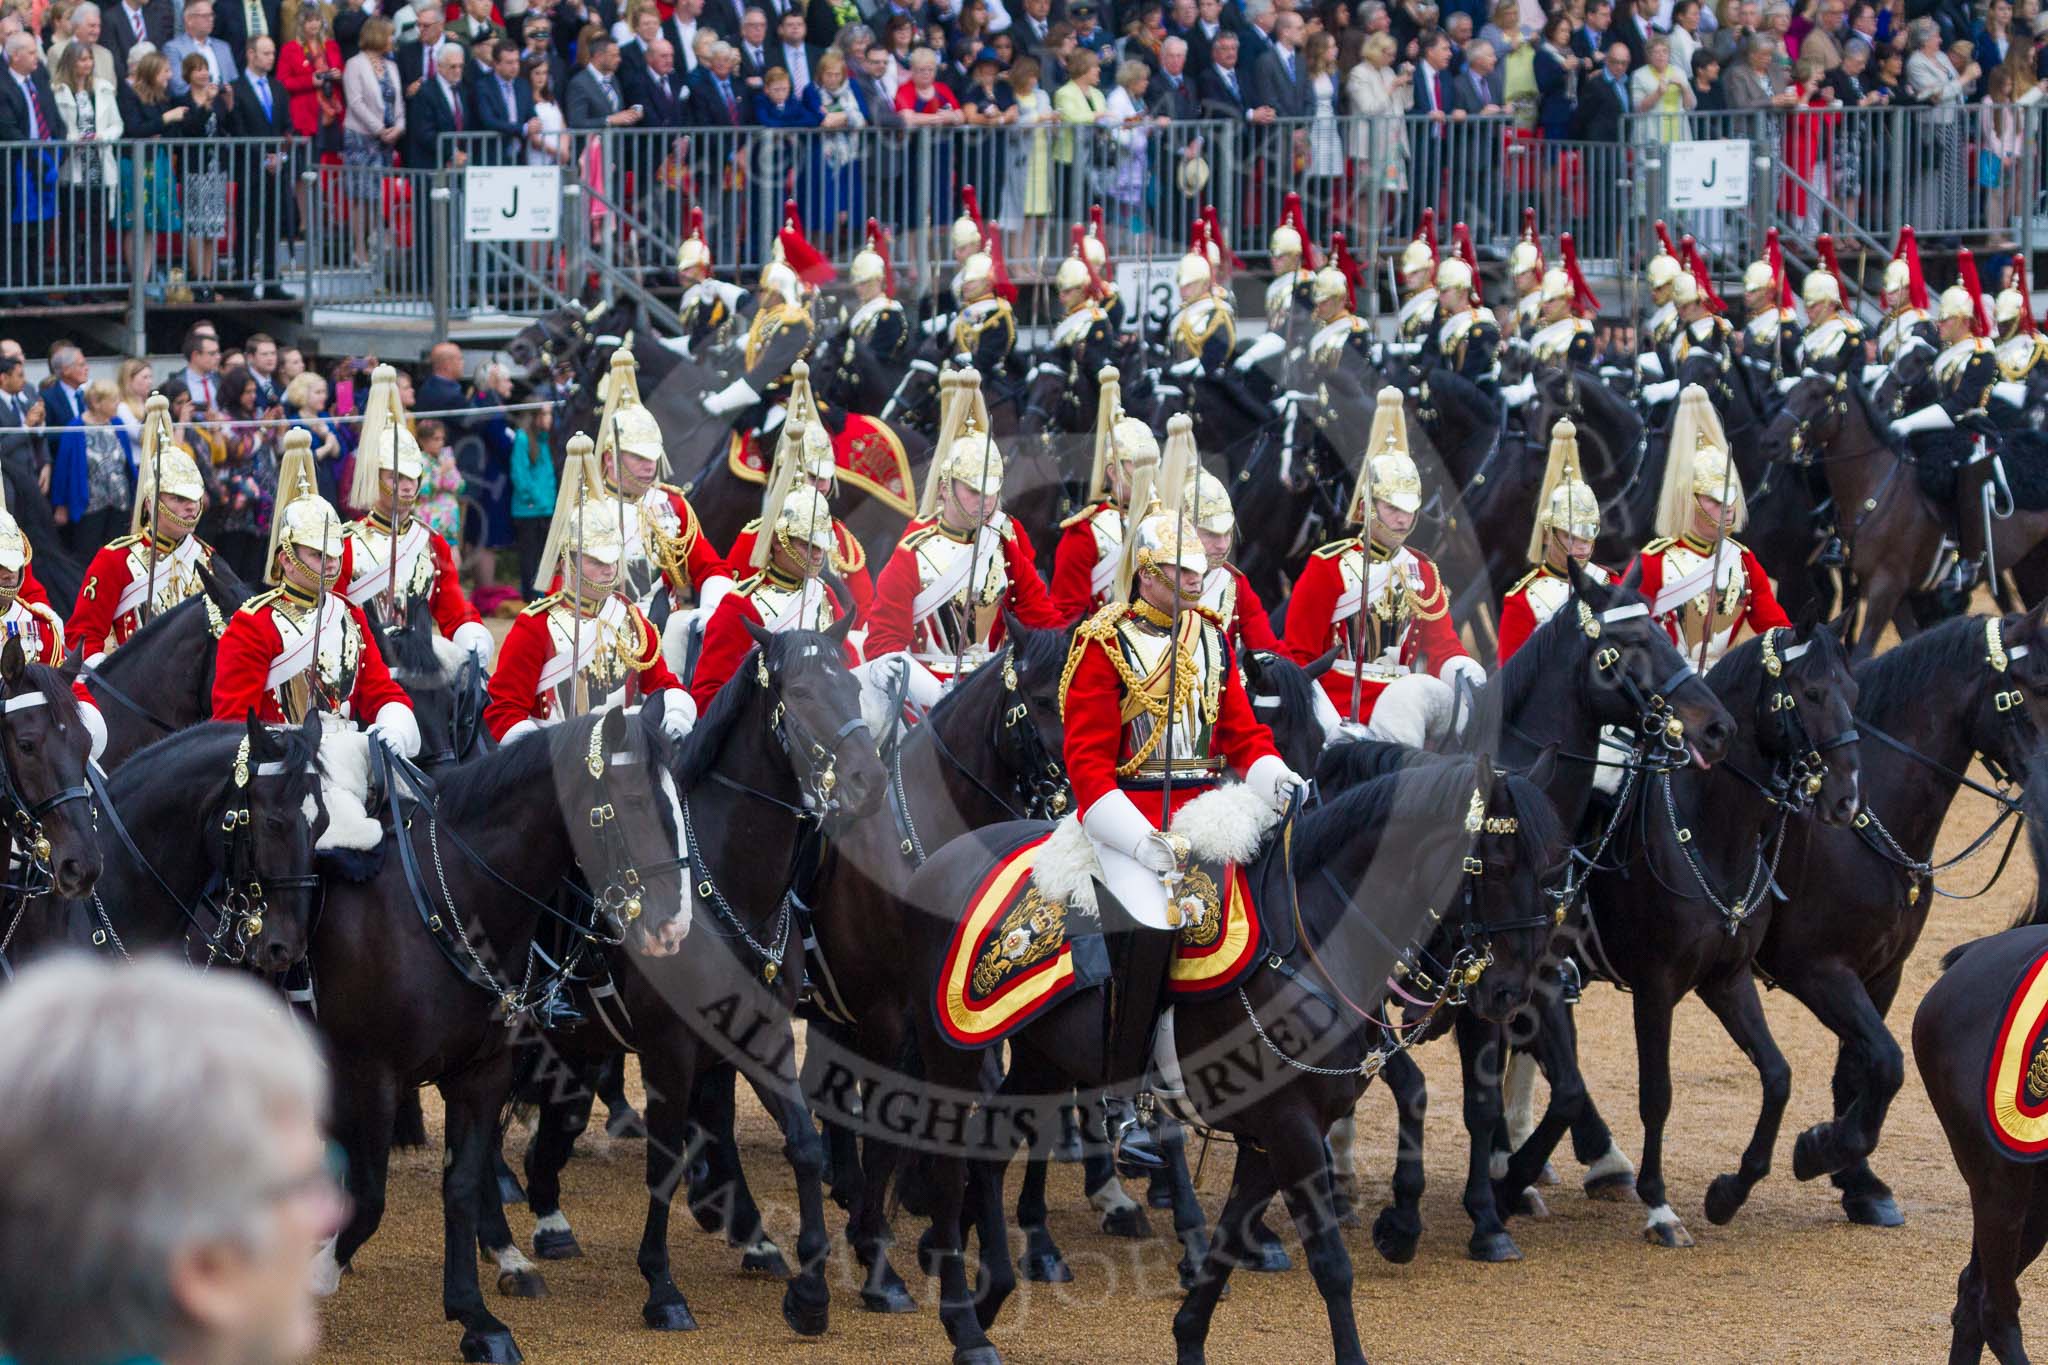 Trooping the Colour 2015. Image #552, 13 June 2015 11:54 Horse Guards Parade, London, UK